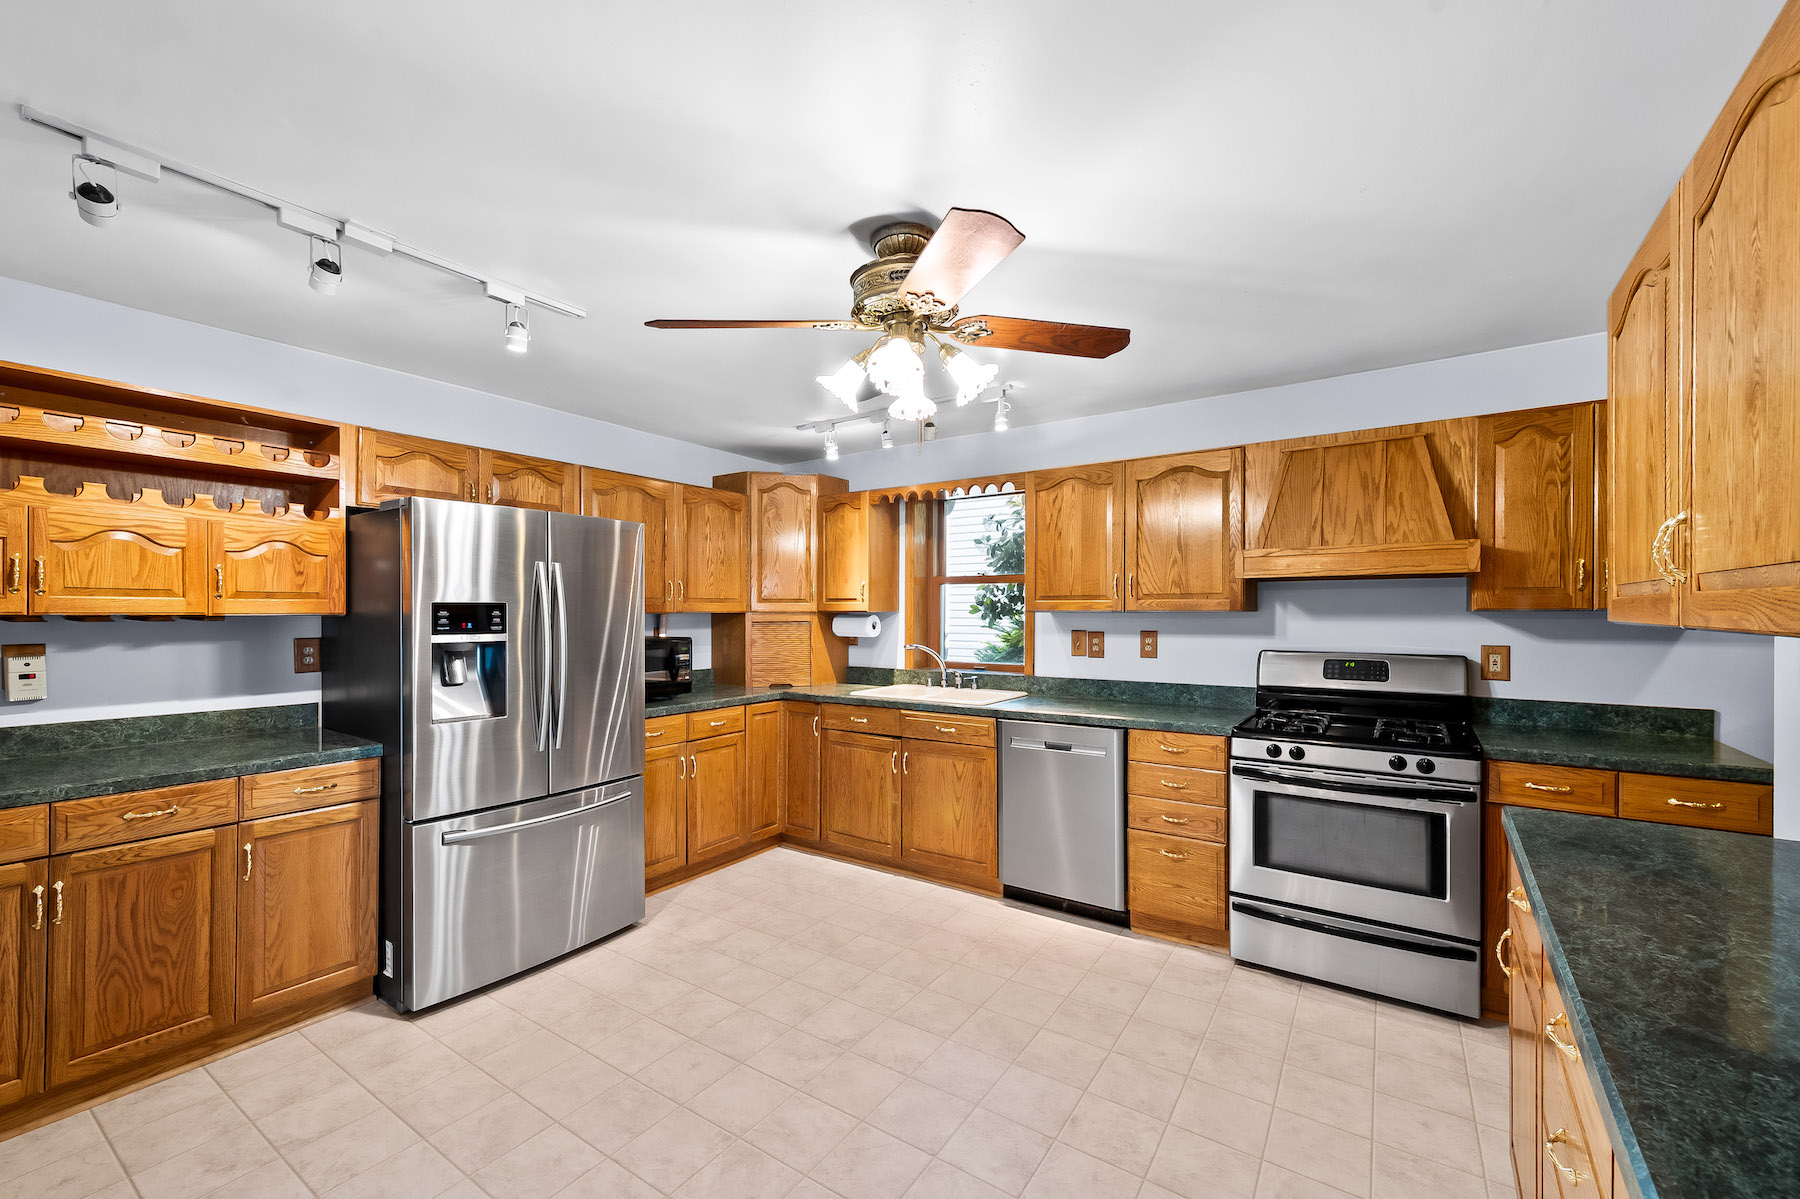 1246 S 48th St, kitchen showing appliances and ceiling fan.